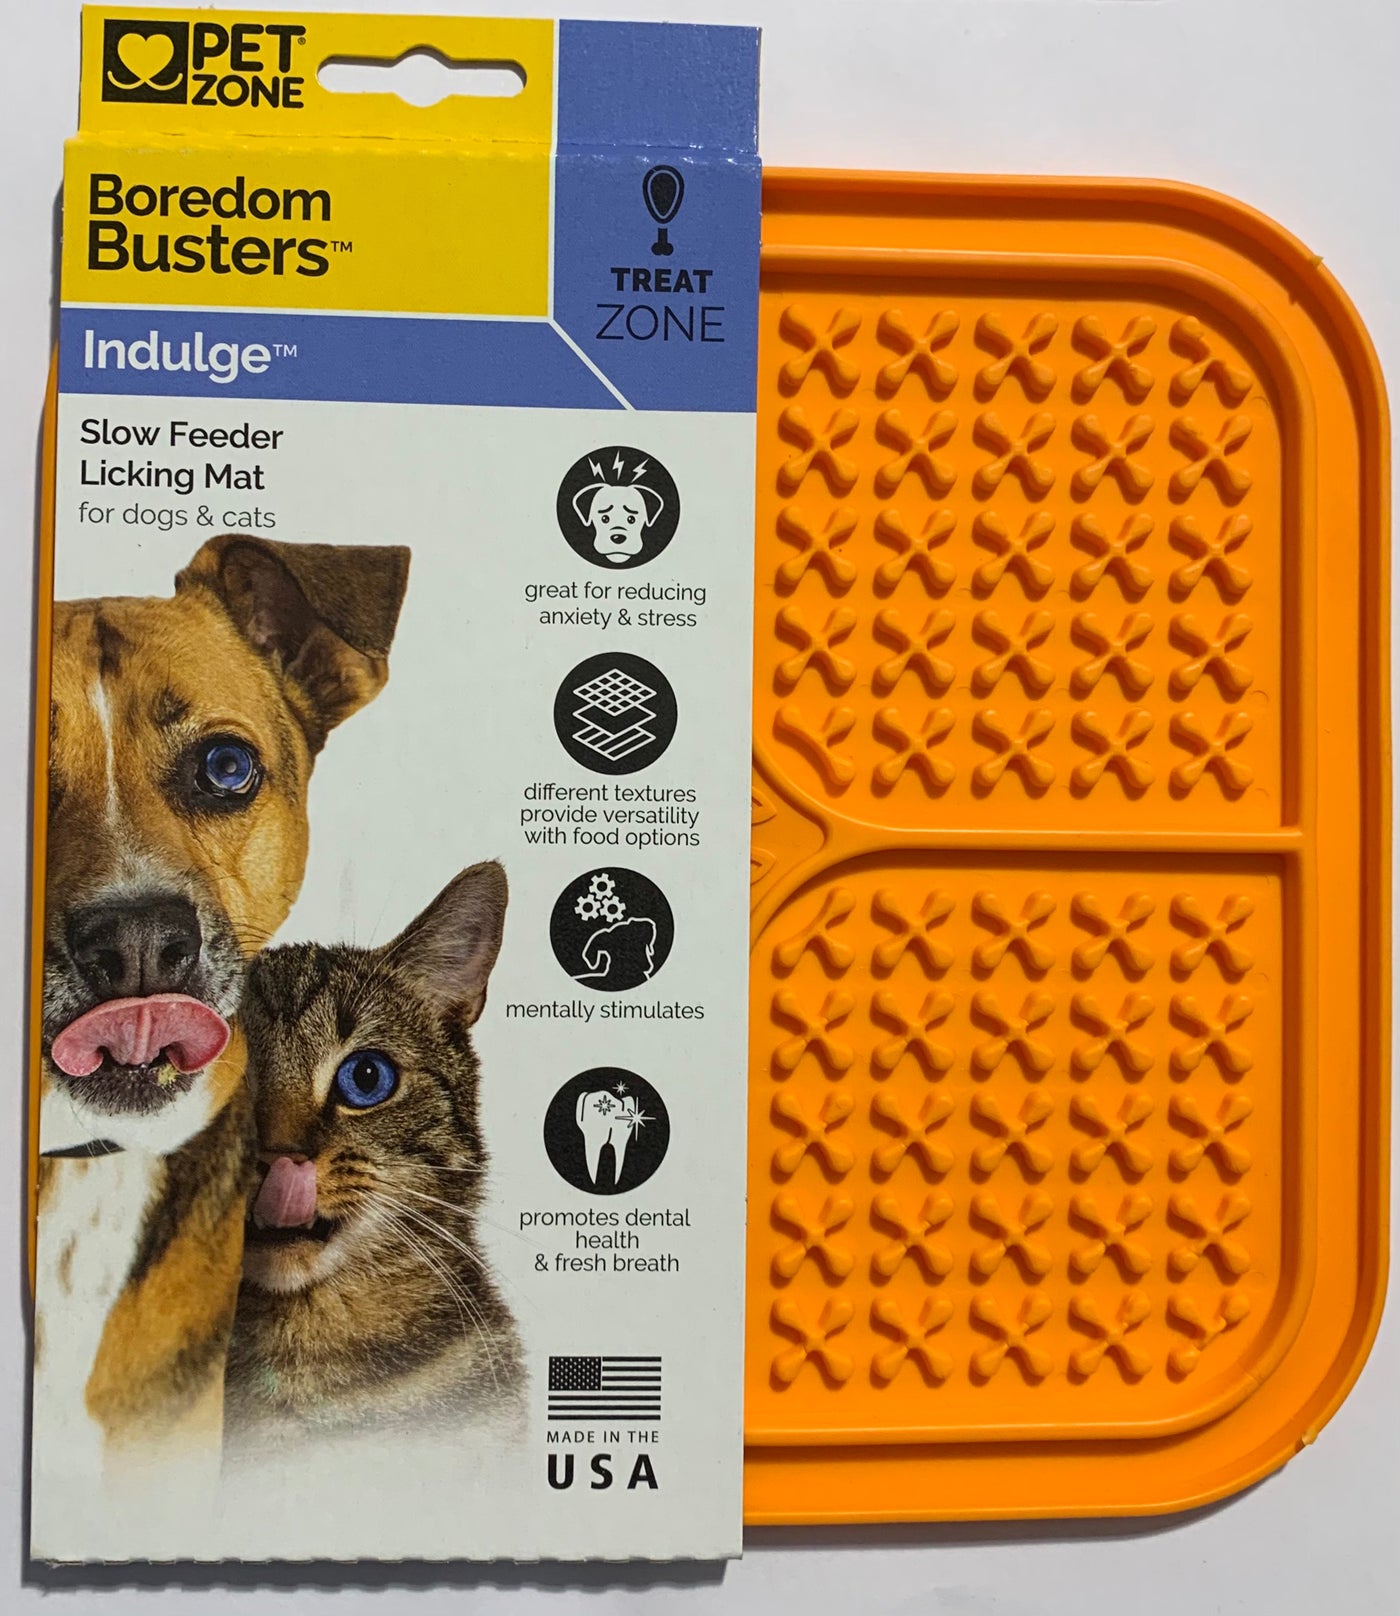  Boredom Busters For Dogs